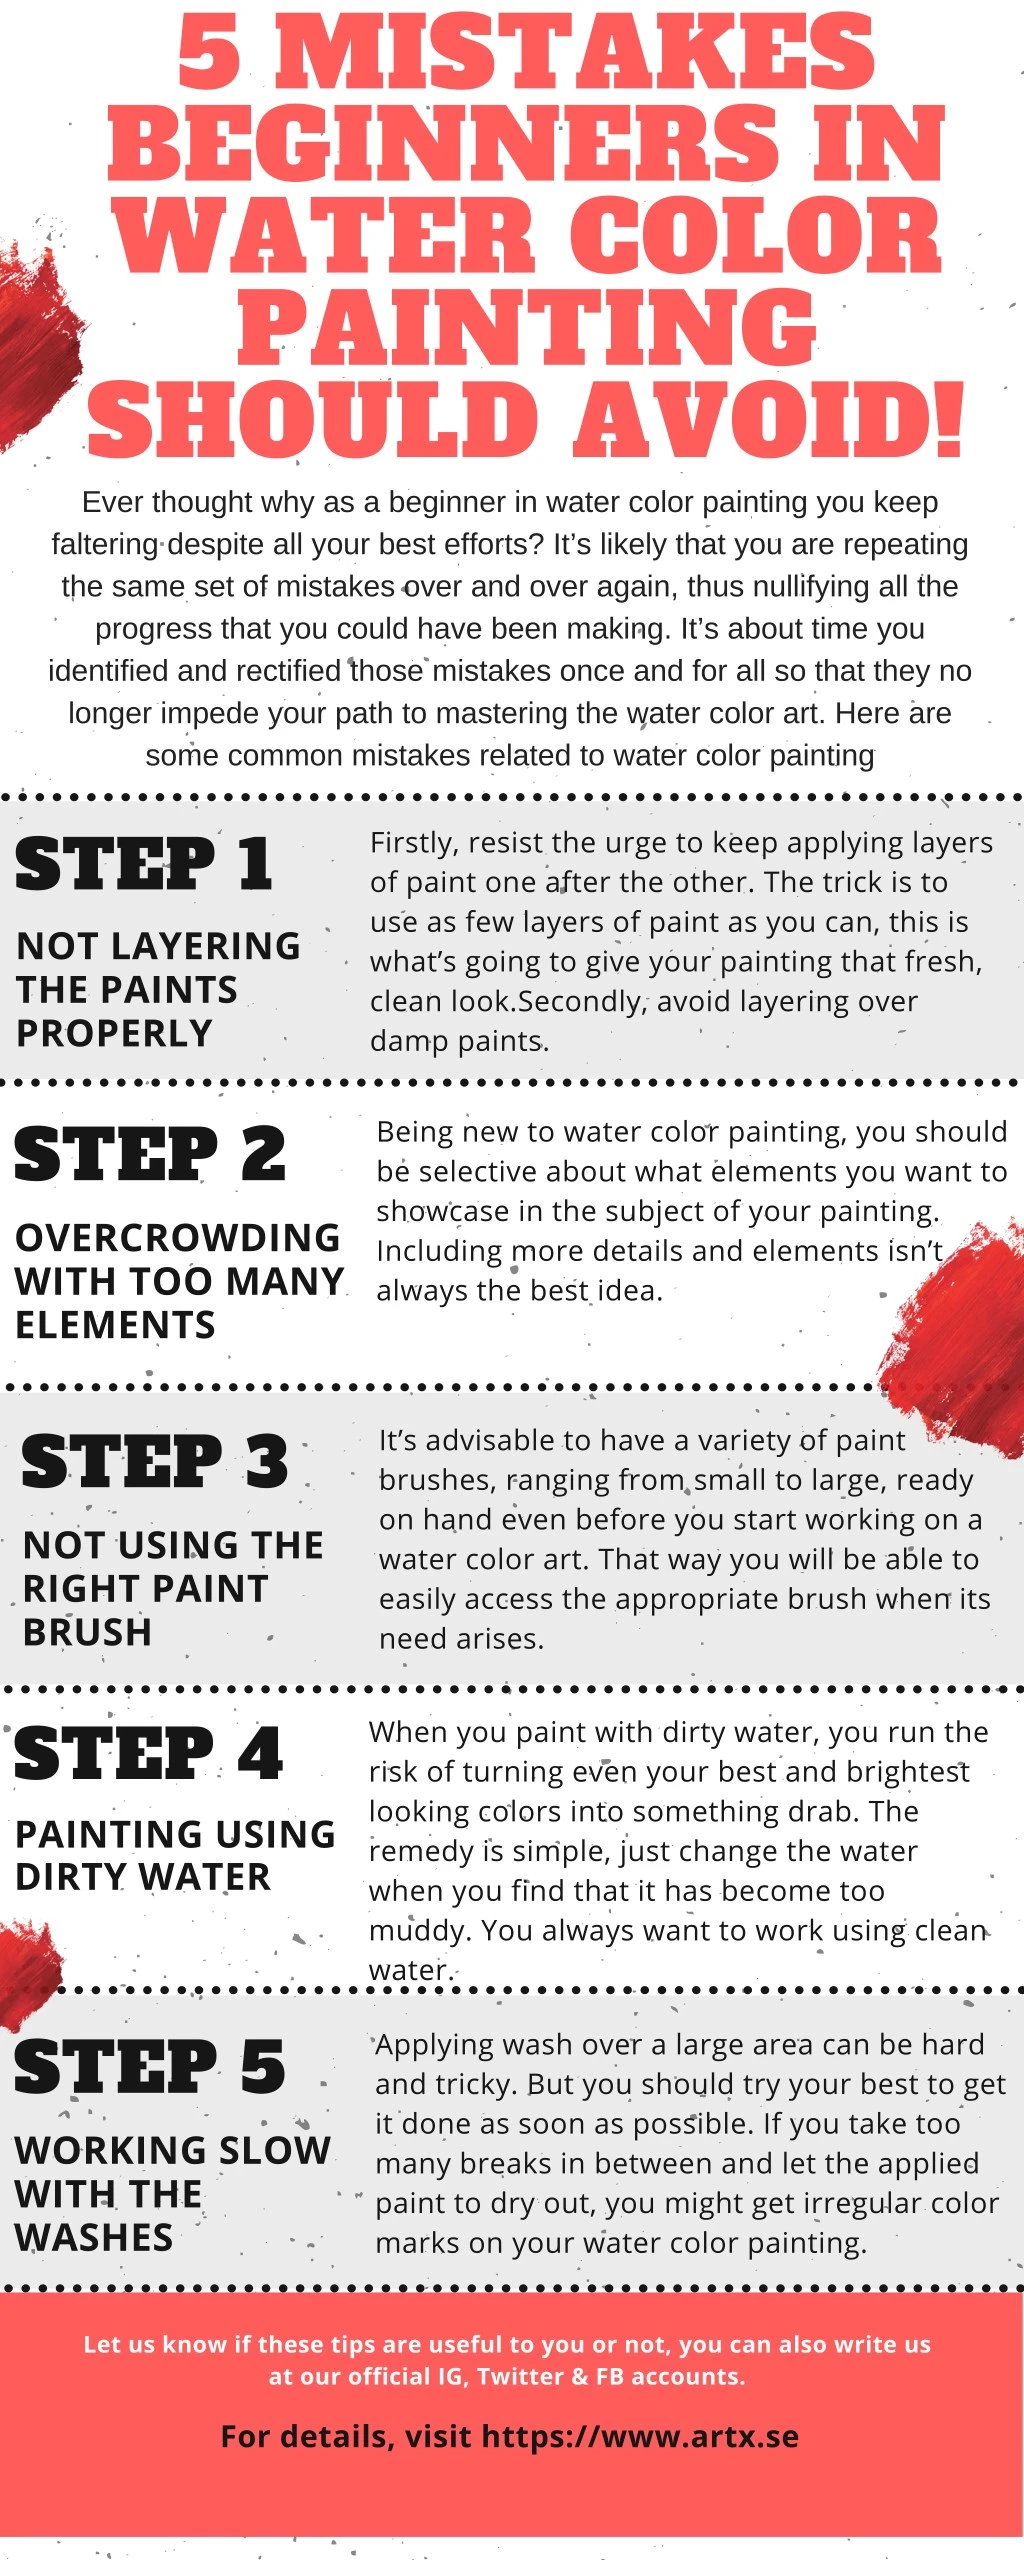 5 mistakes beginners in water color painting